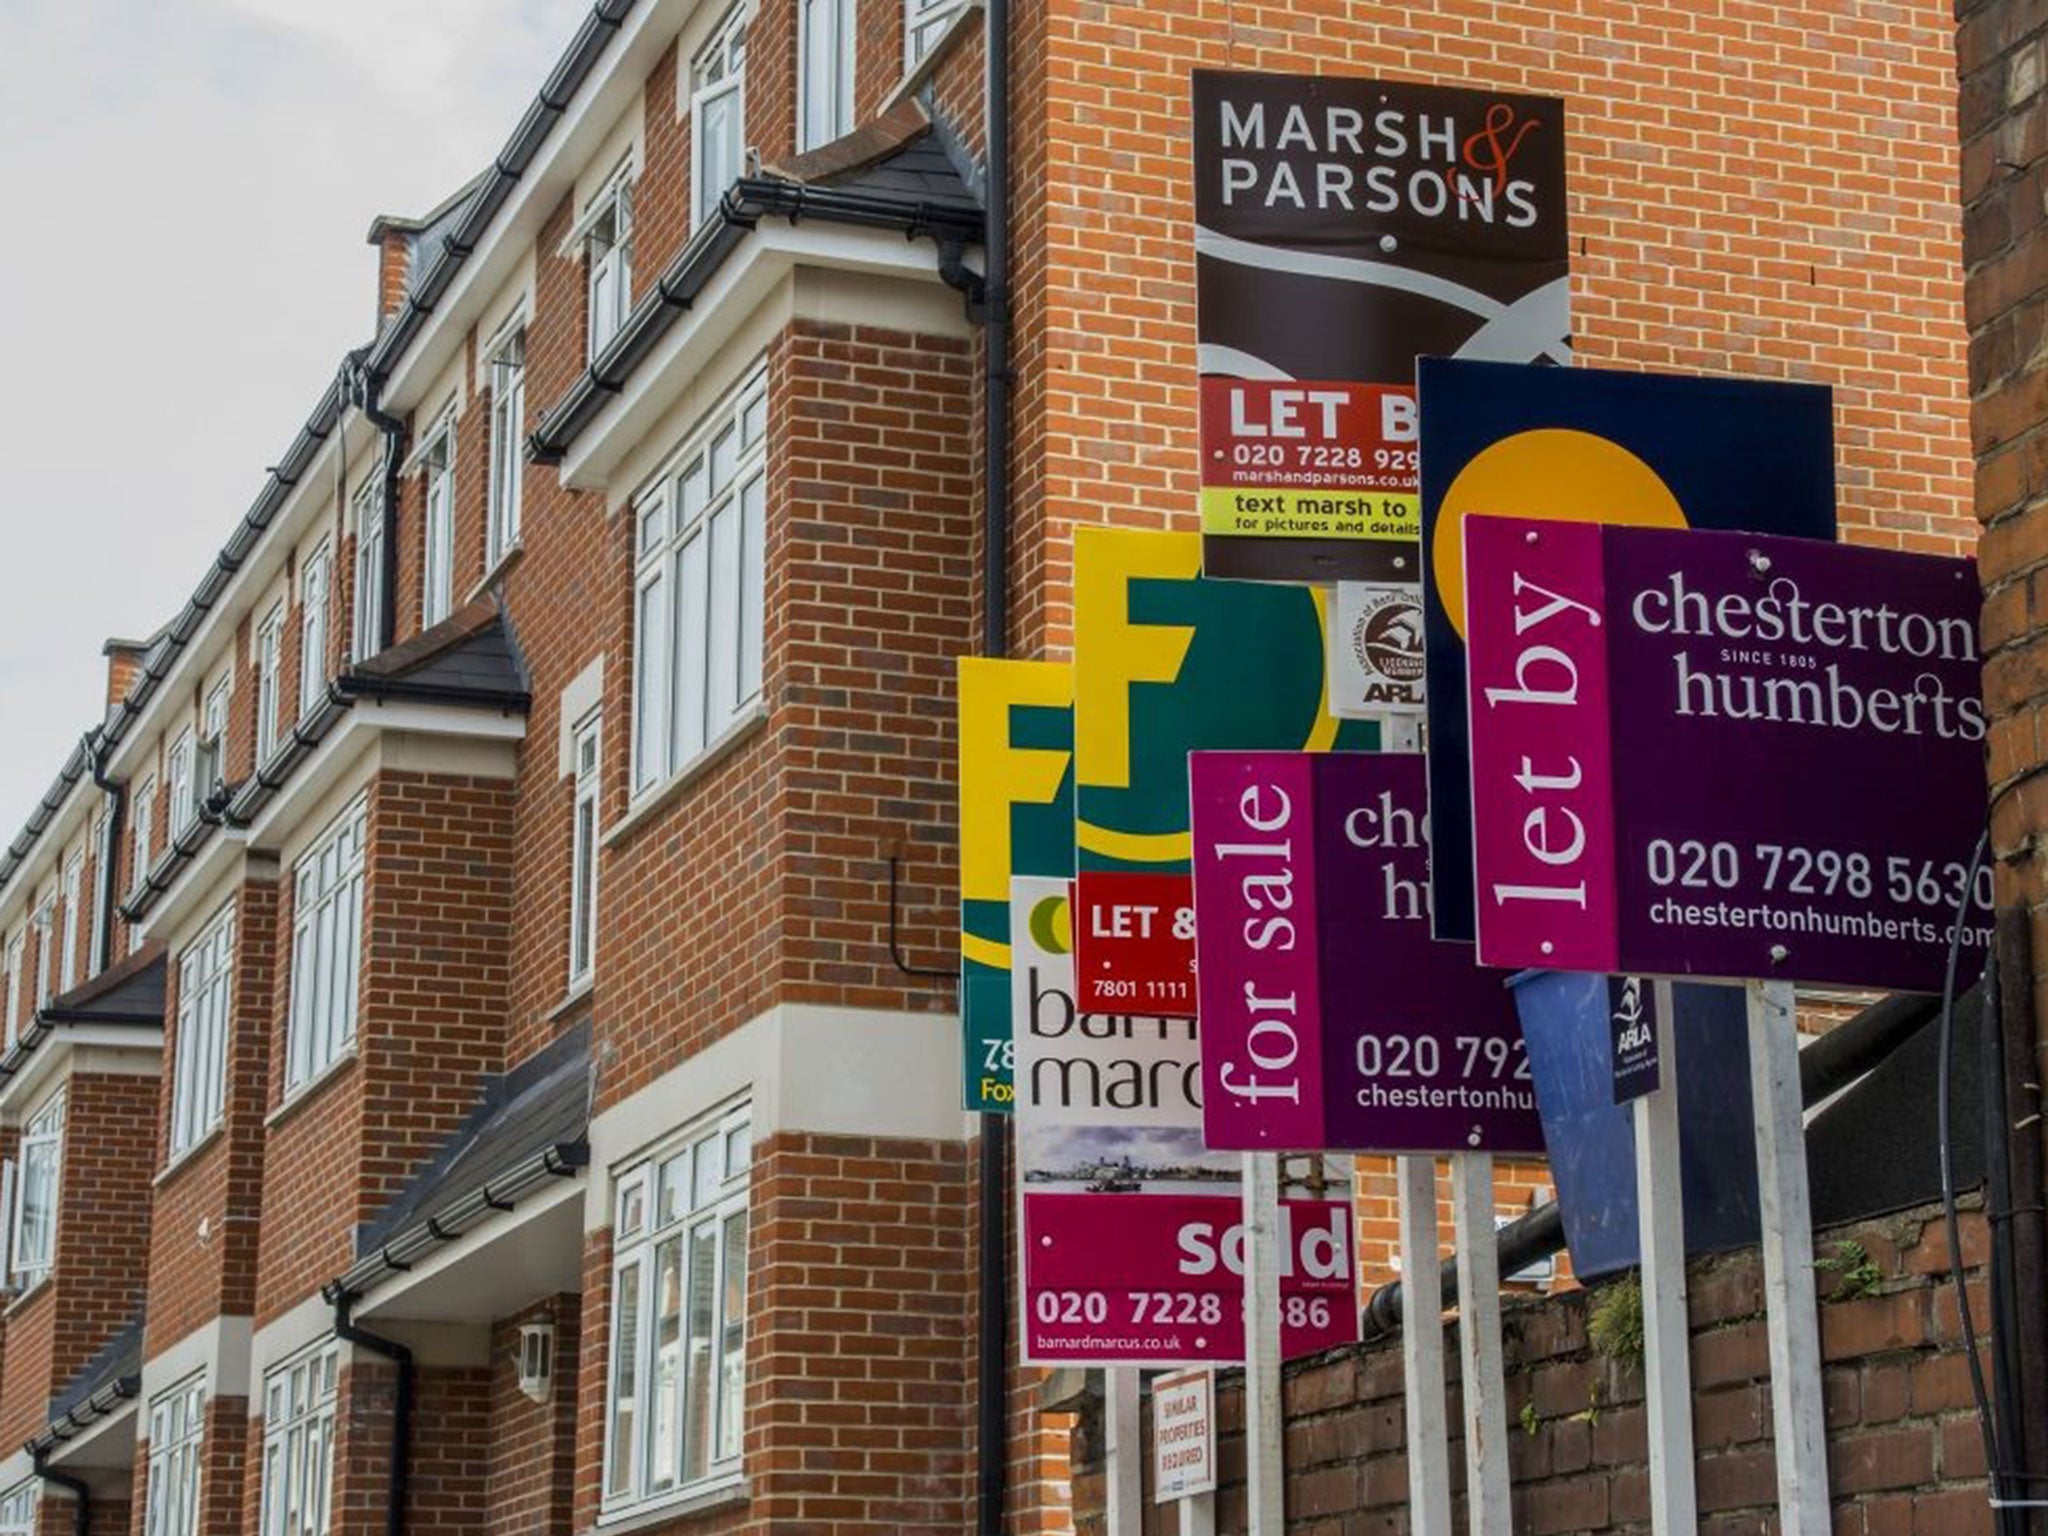 Landlords say they will pass on costs to tenants